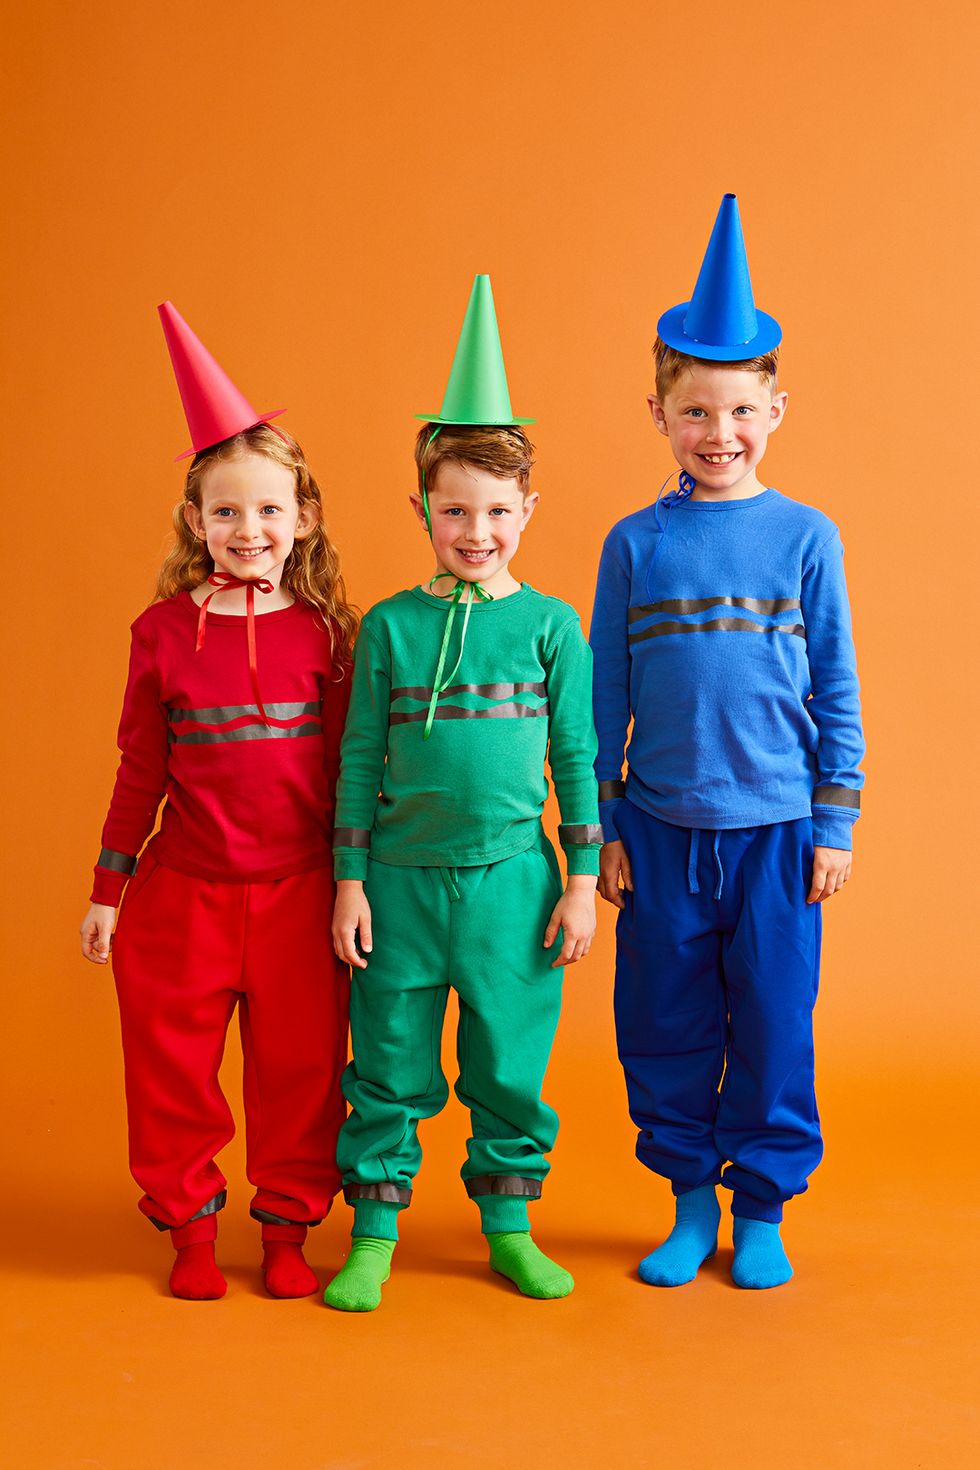 8 Quick Costume Ideas for Kids